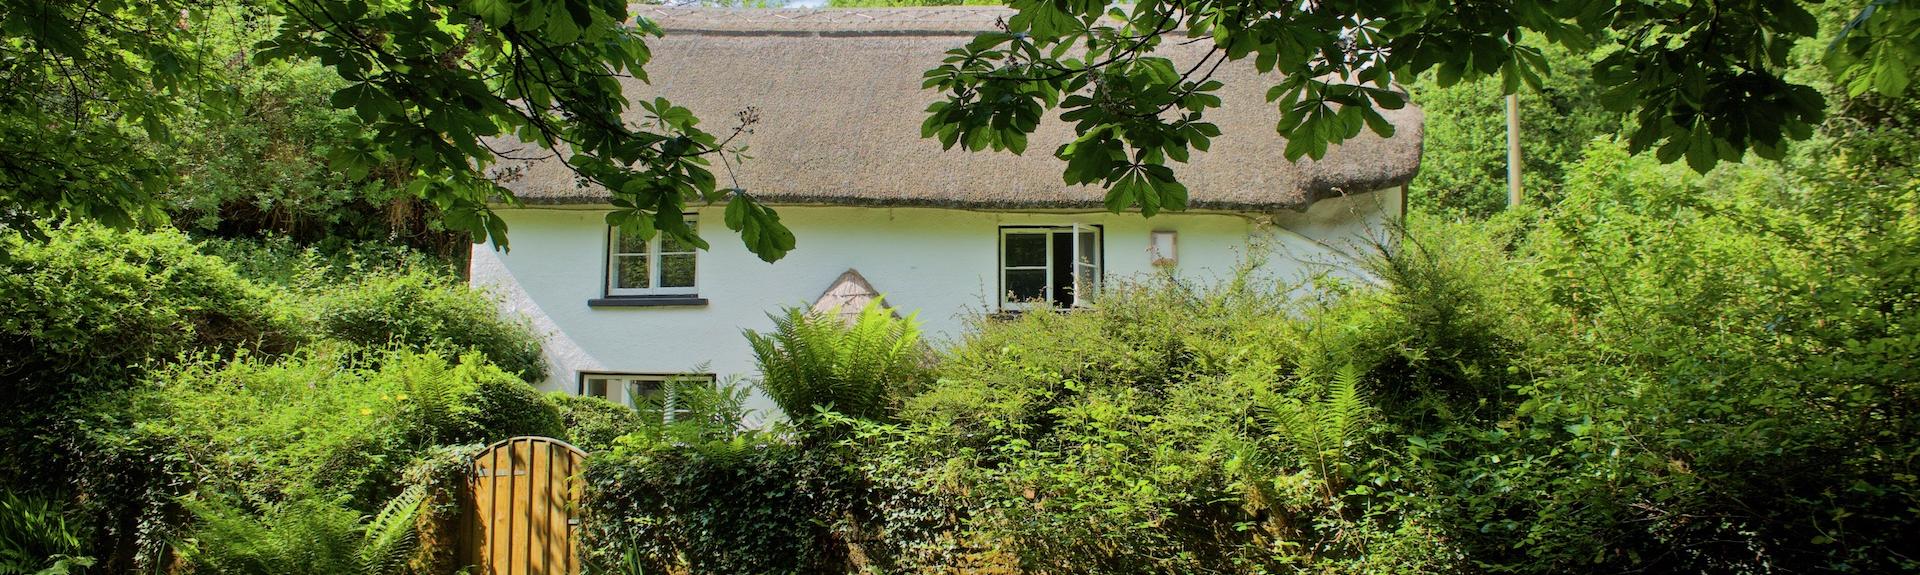 Public Expectations For Holiday Cottages 2020 and Beyond